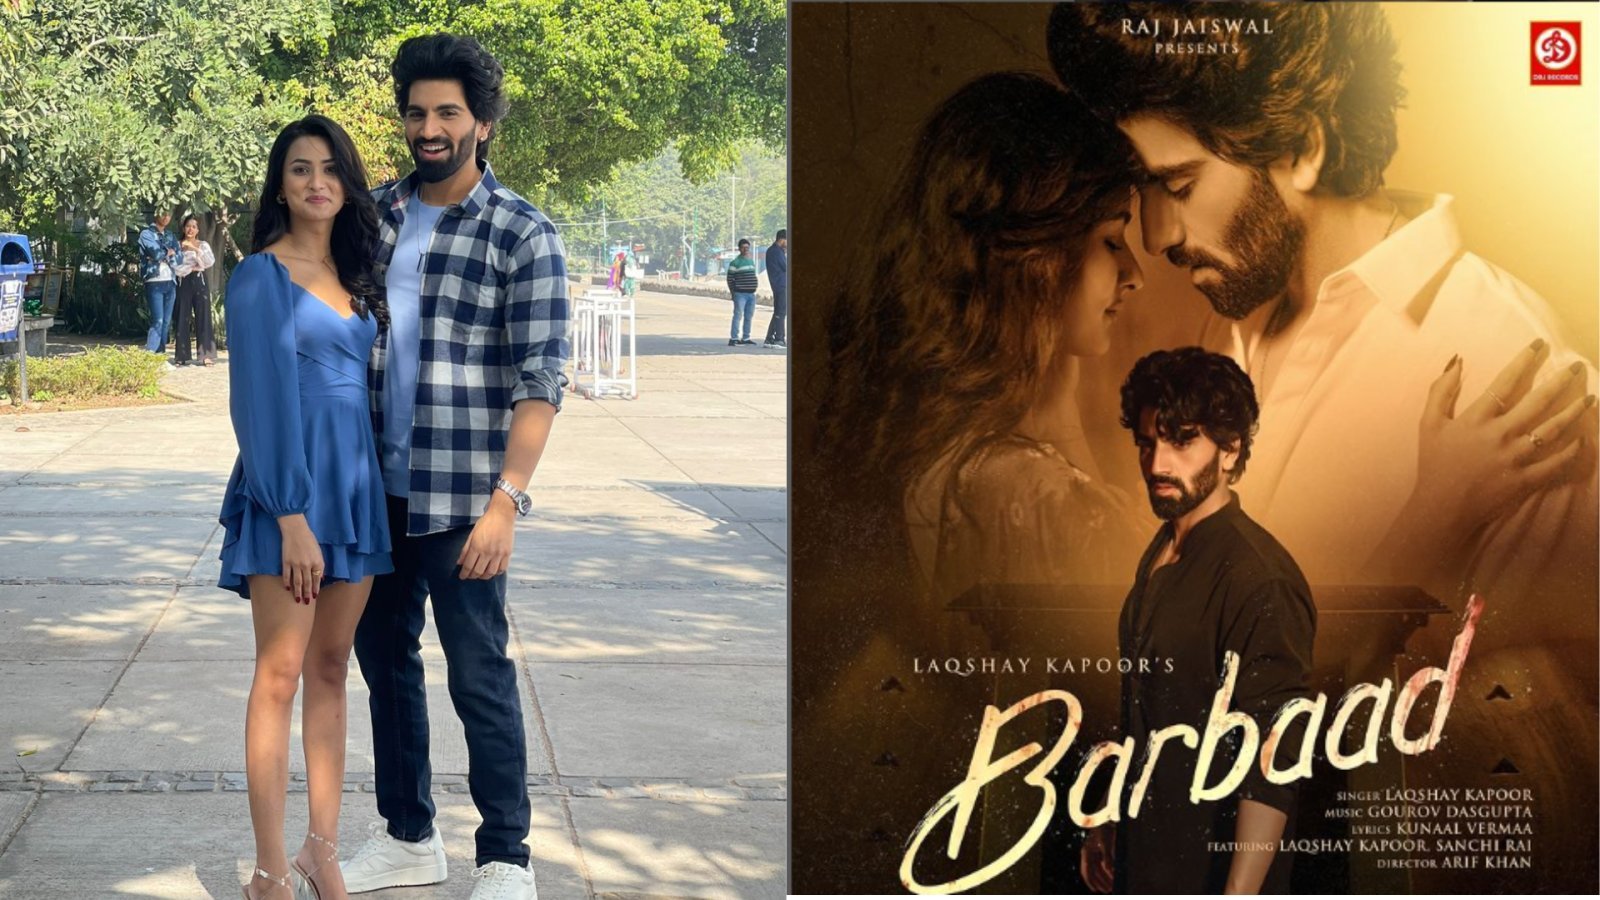 Witness The Biggest Heartbreak Anthem Of The Year With Actress Sanchi Rai and Laqshay Kapoor's Song'Barbaad'